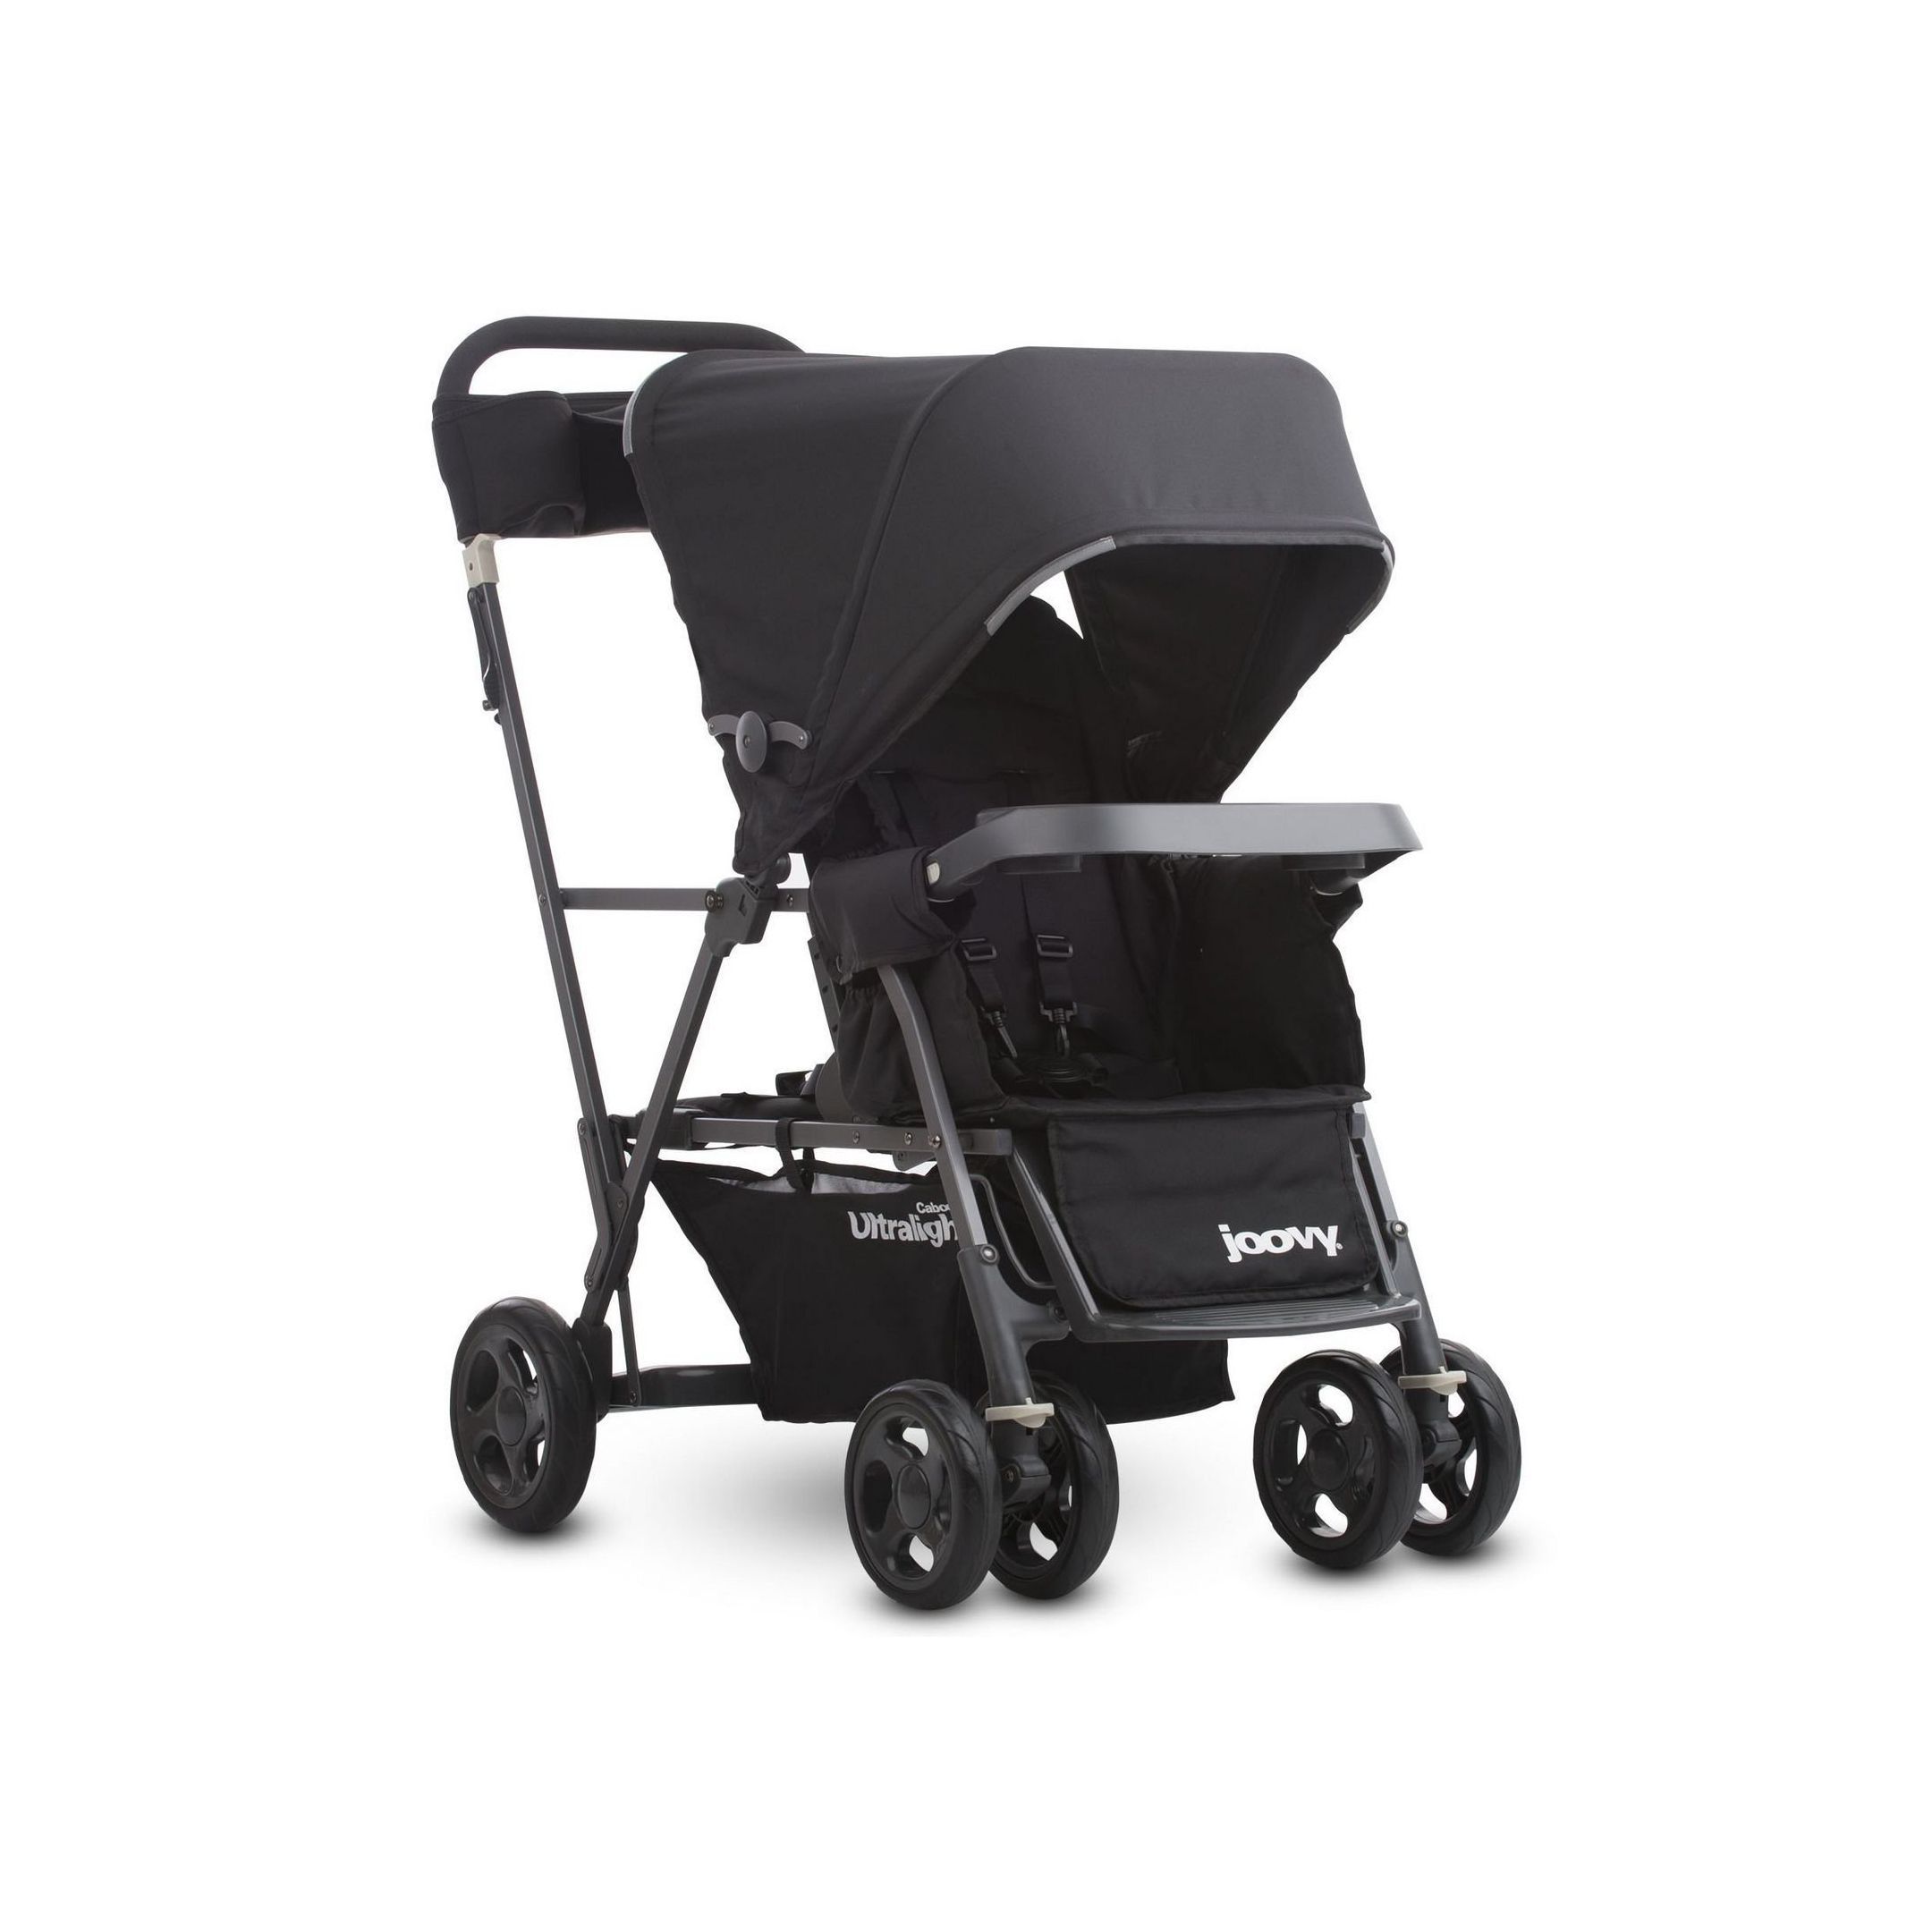 13 Best Double Strollers of 2021 - Tandem Strollers for Infants & Toddlers